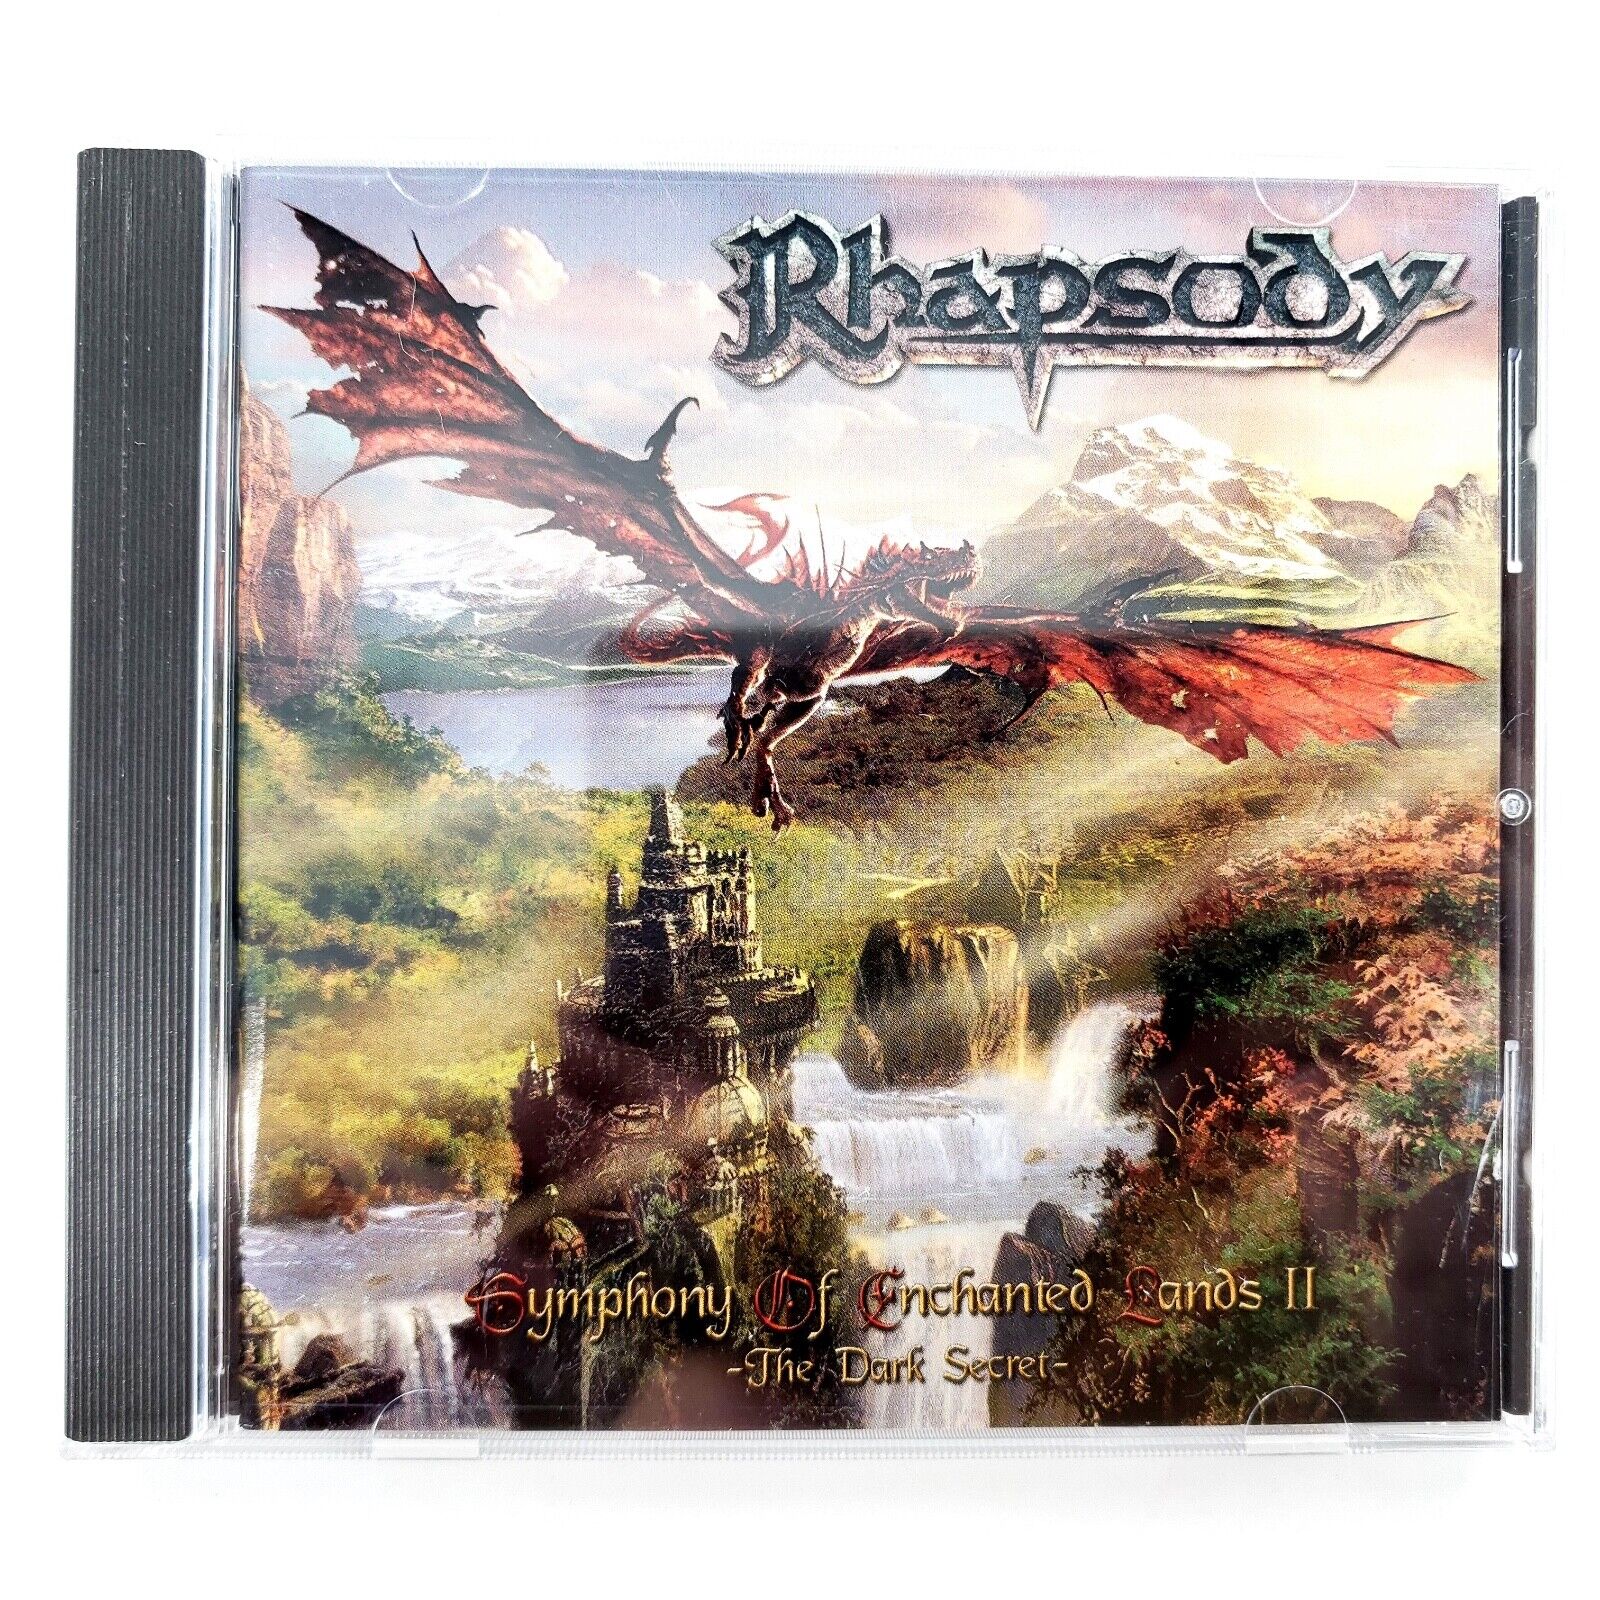 Symphony Of Enchated Lands II - The Dark Secret by Rhapsody (CD) Tested & Works